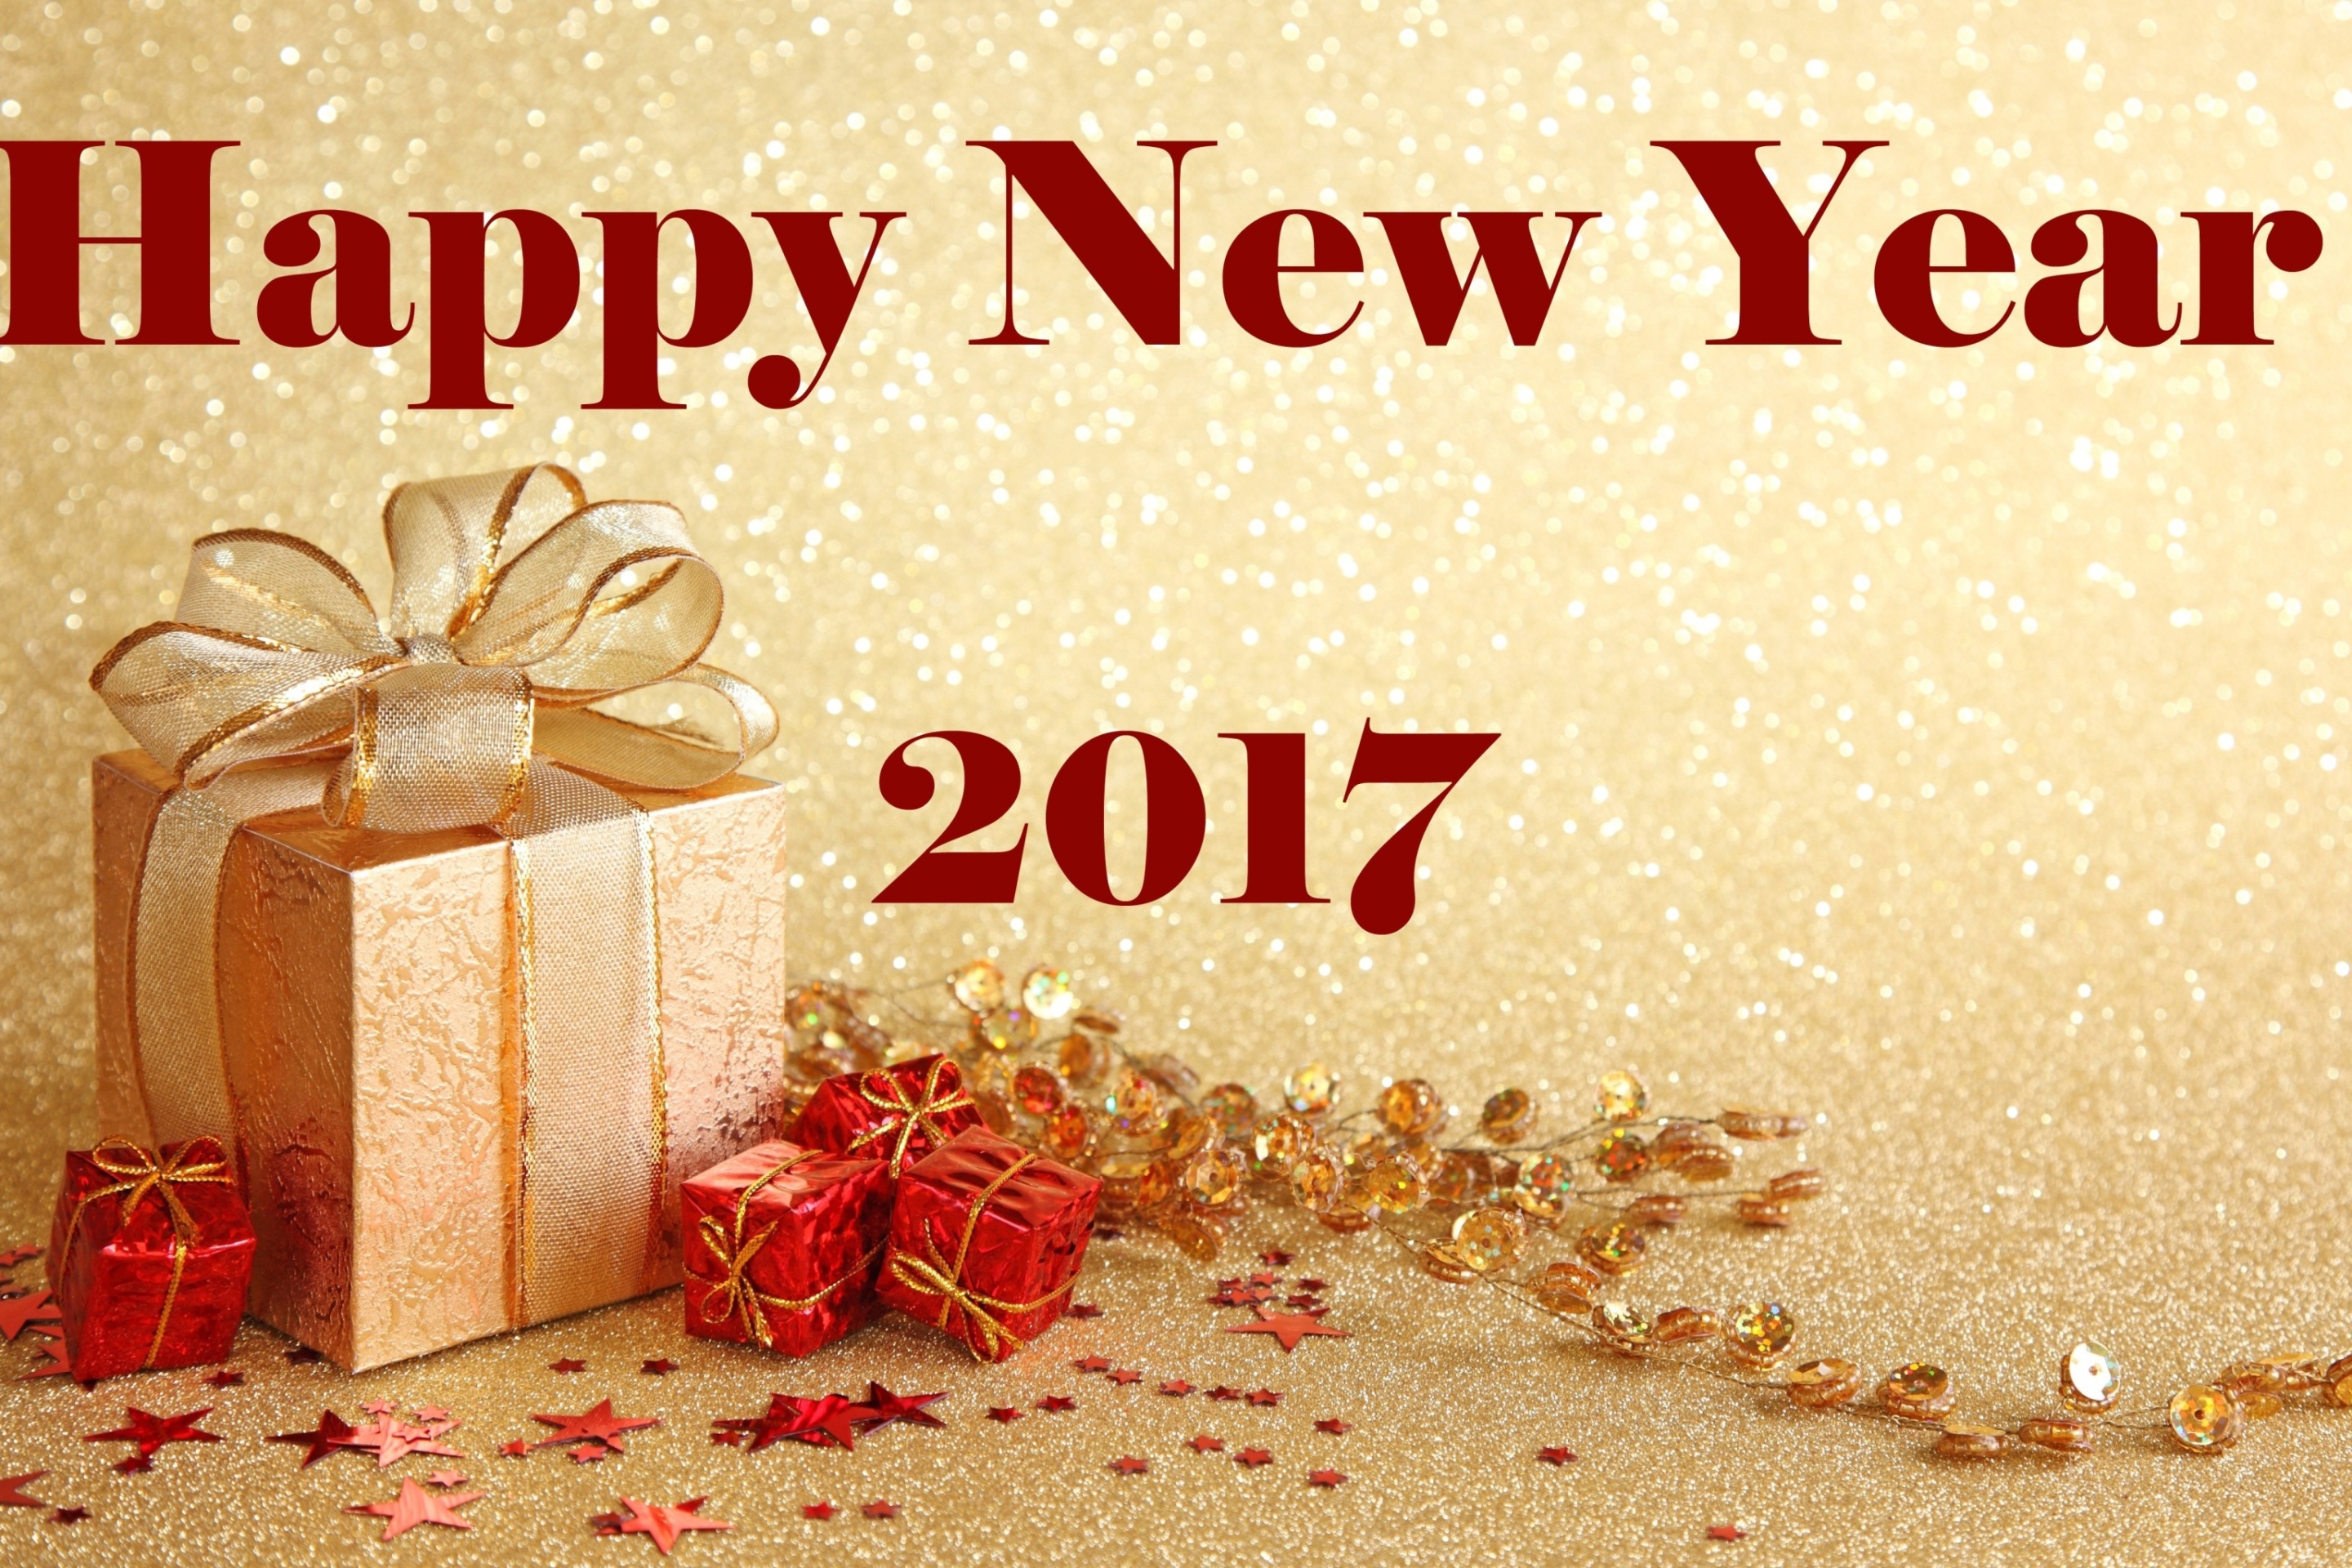 Das Happy New Year 2017 with Gifts Wallpaper 2880x1920